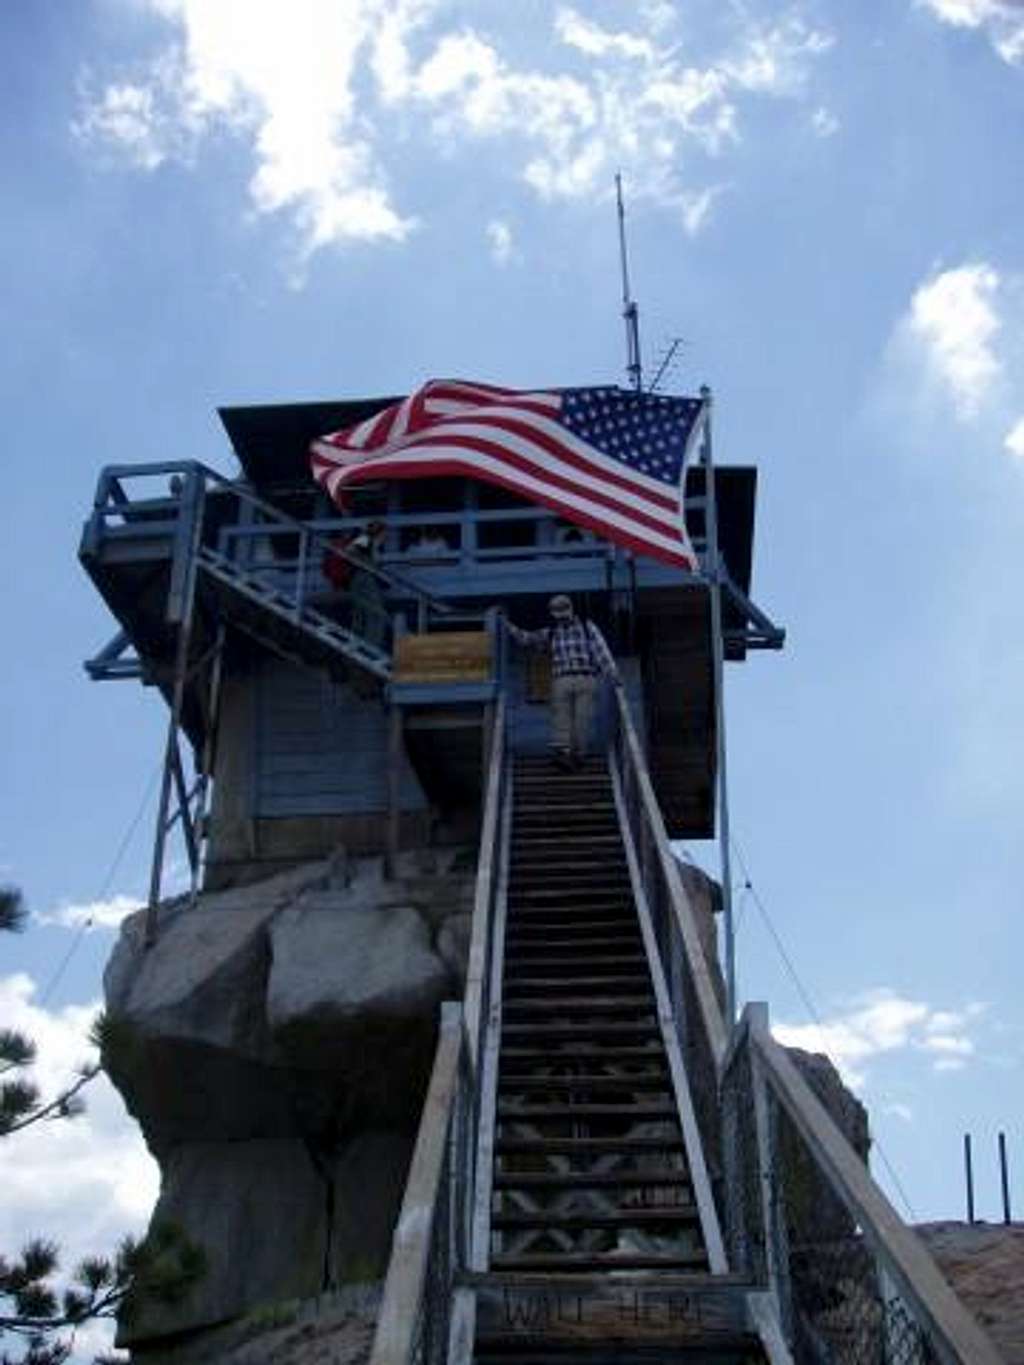 The Needles Fire Lookout